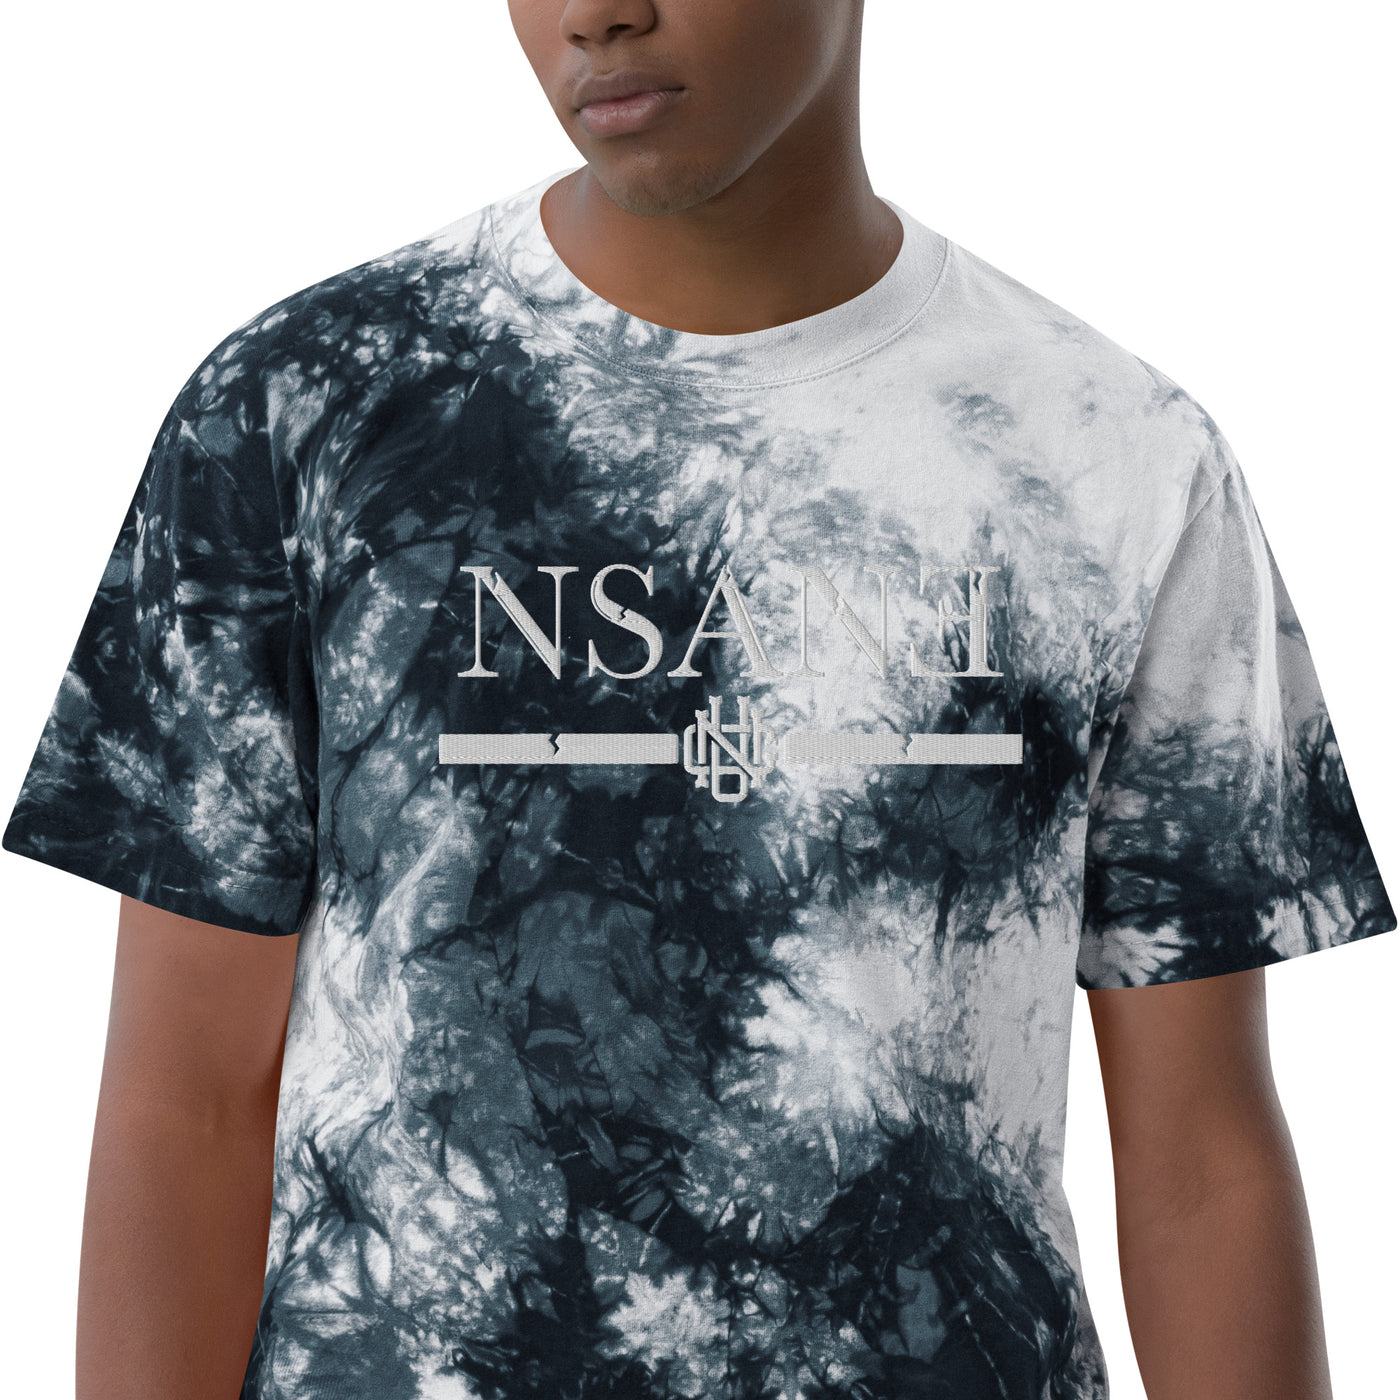 Nsane Signature Oversized tie-dye t-shirt - Unique Sweatsuits, hats, tees, shorts, hoodies, Outwear & accessories online | Uneekly Nsane